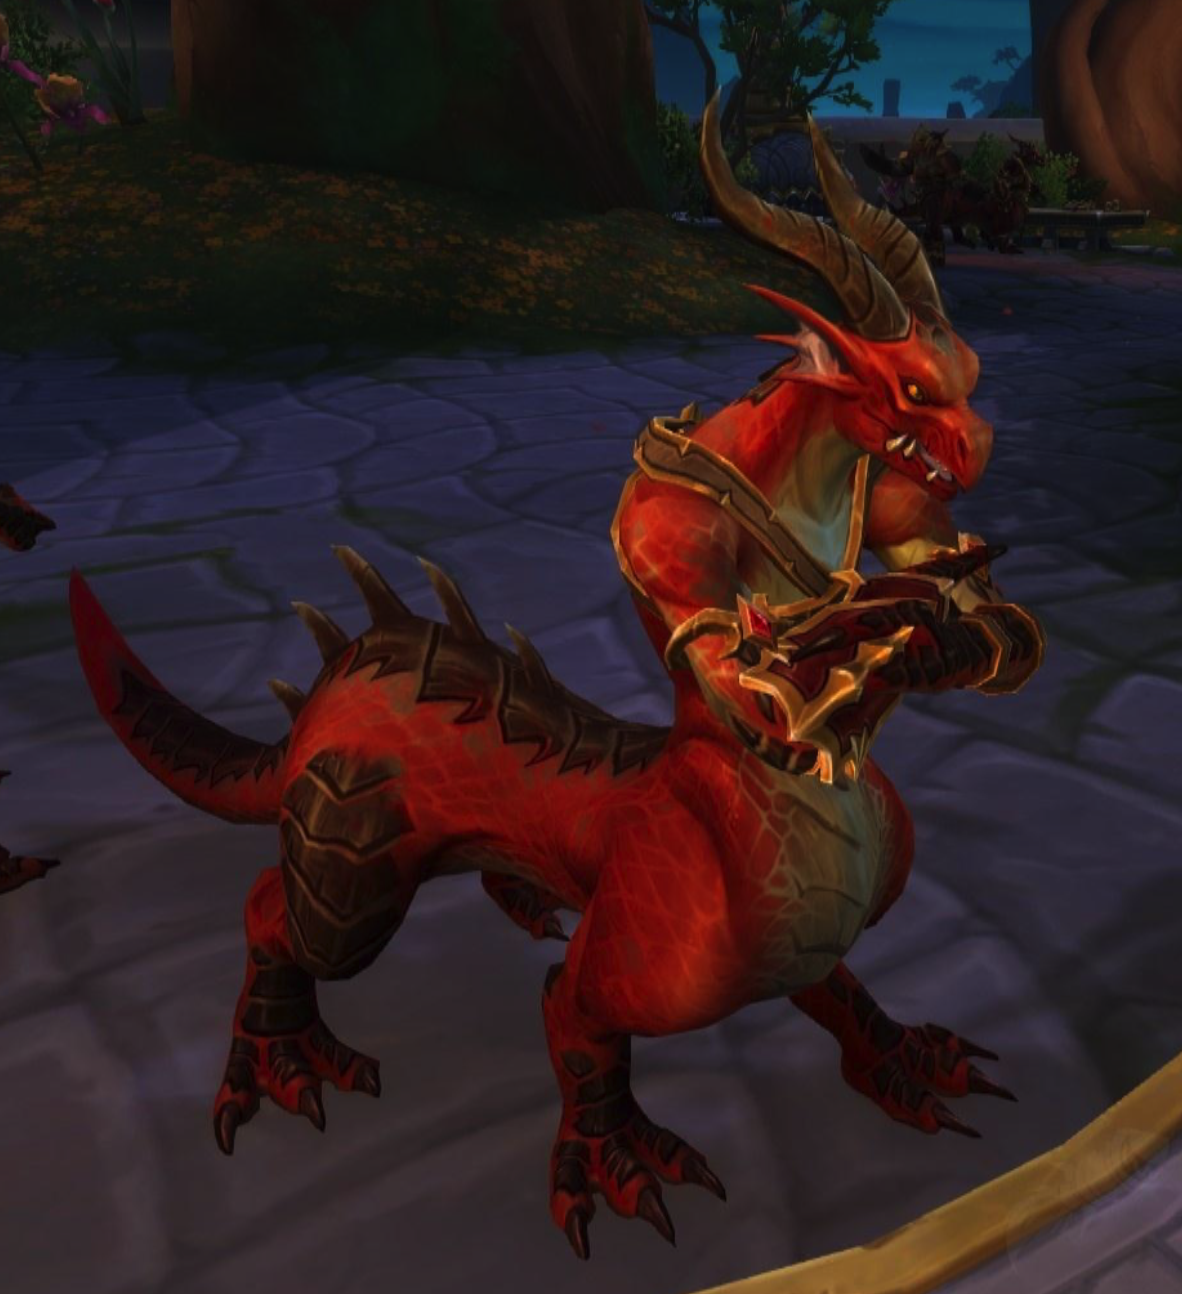 Dreaming Crests in WoW Dragonflight: Everything You Need to Know